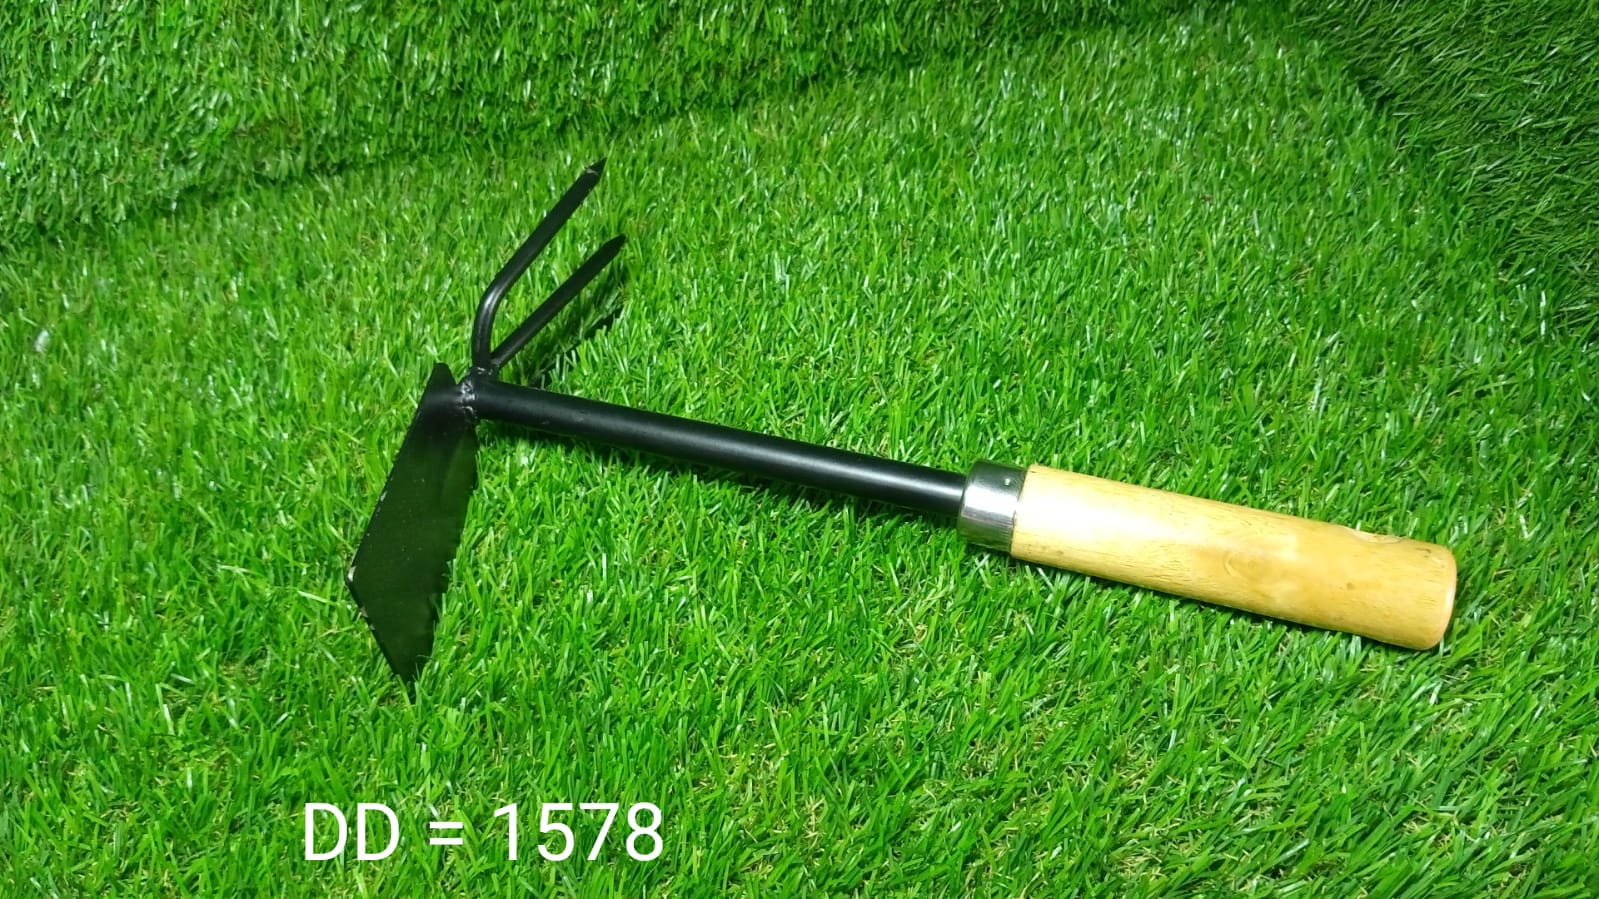 2-in-1 Double Hoe Gardening Tool with Wooden Handle